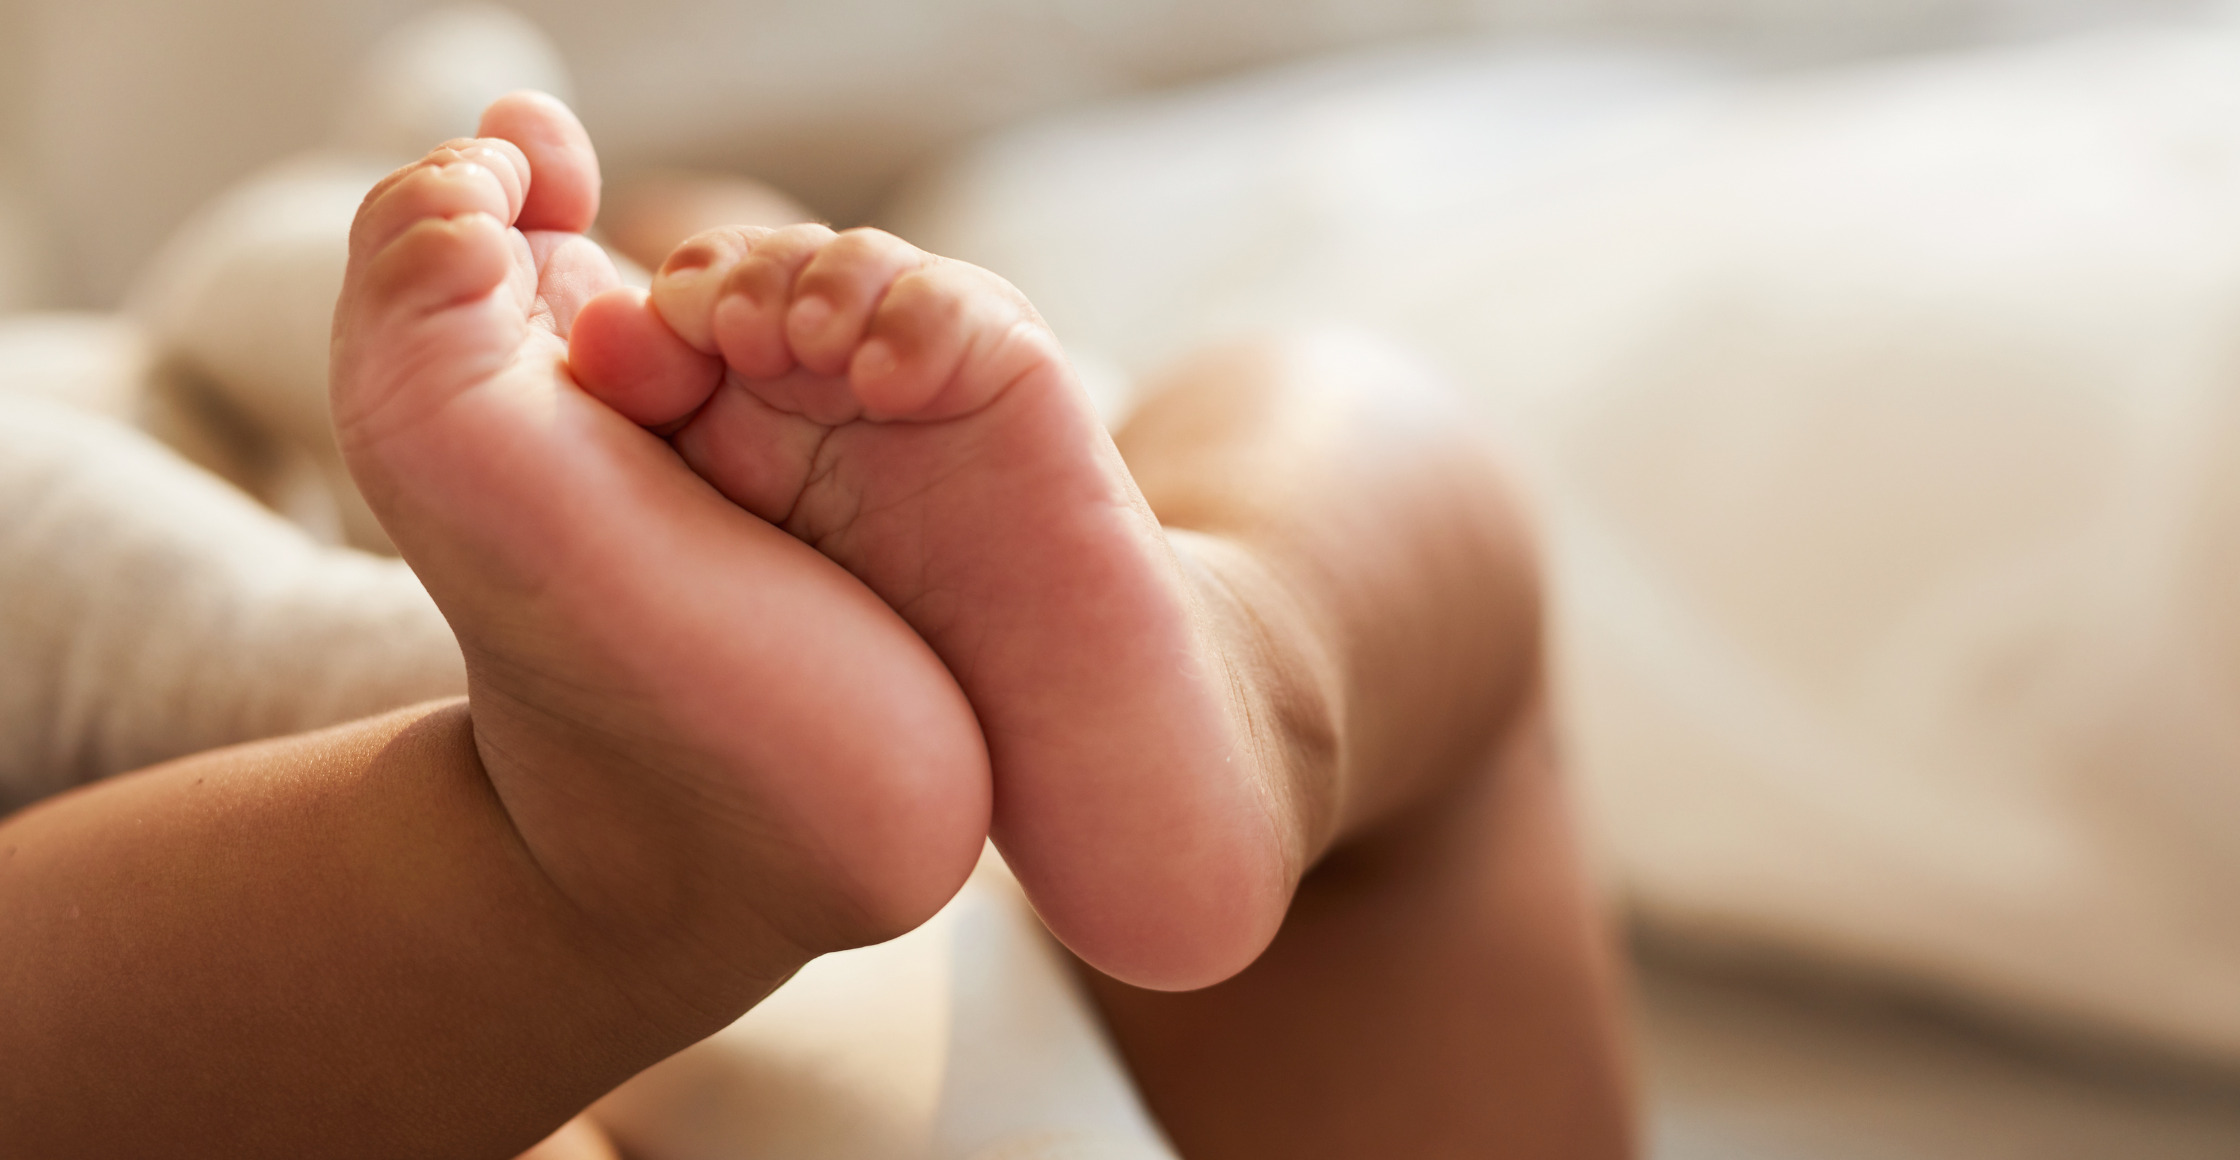 Essential Items to Prepare for Welcoming Your Newborn Home